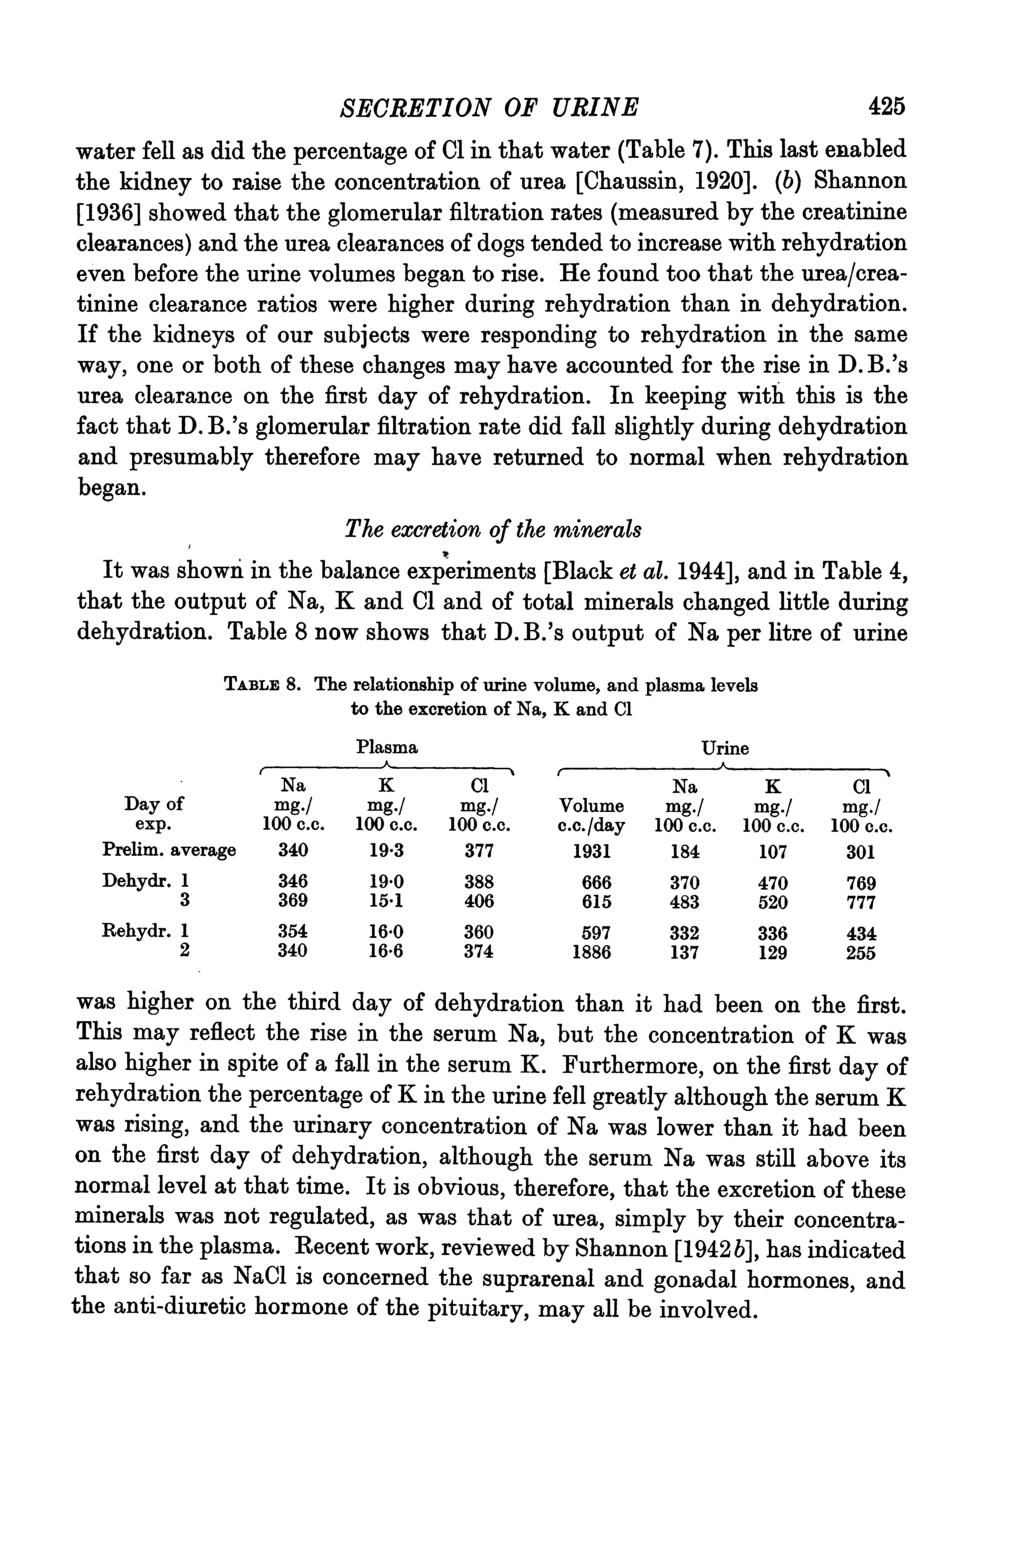 SECRETION OF URINE 425 water fell as did the percentage of CO in that water (Table 7). This last enabled the kidney to raise the concentration of urea [Chaussin, 1920].